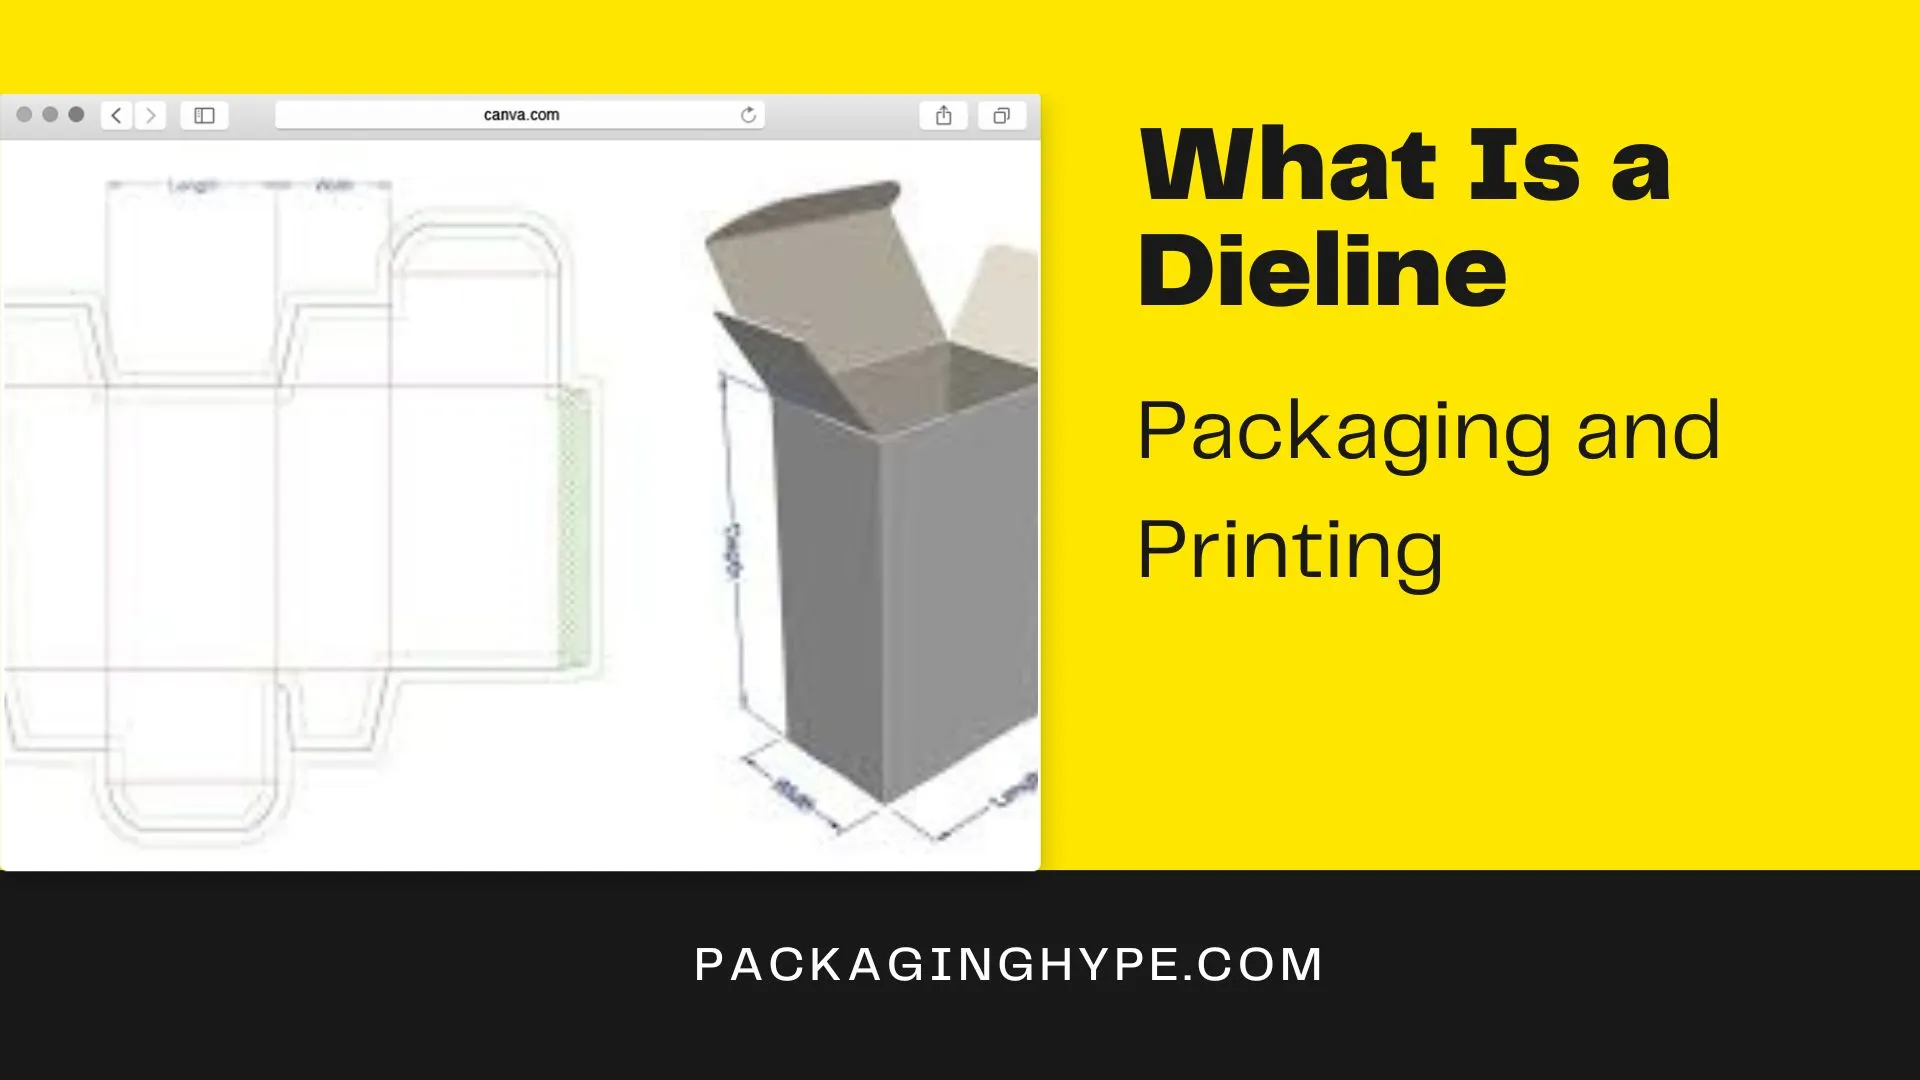 What Is a Dieline in Packaging and Printing?